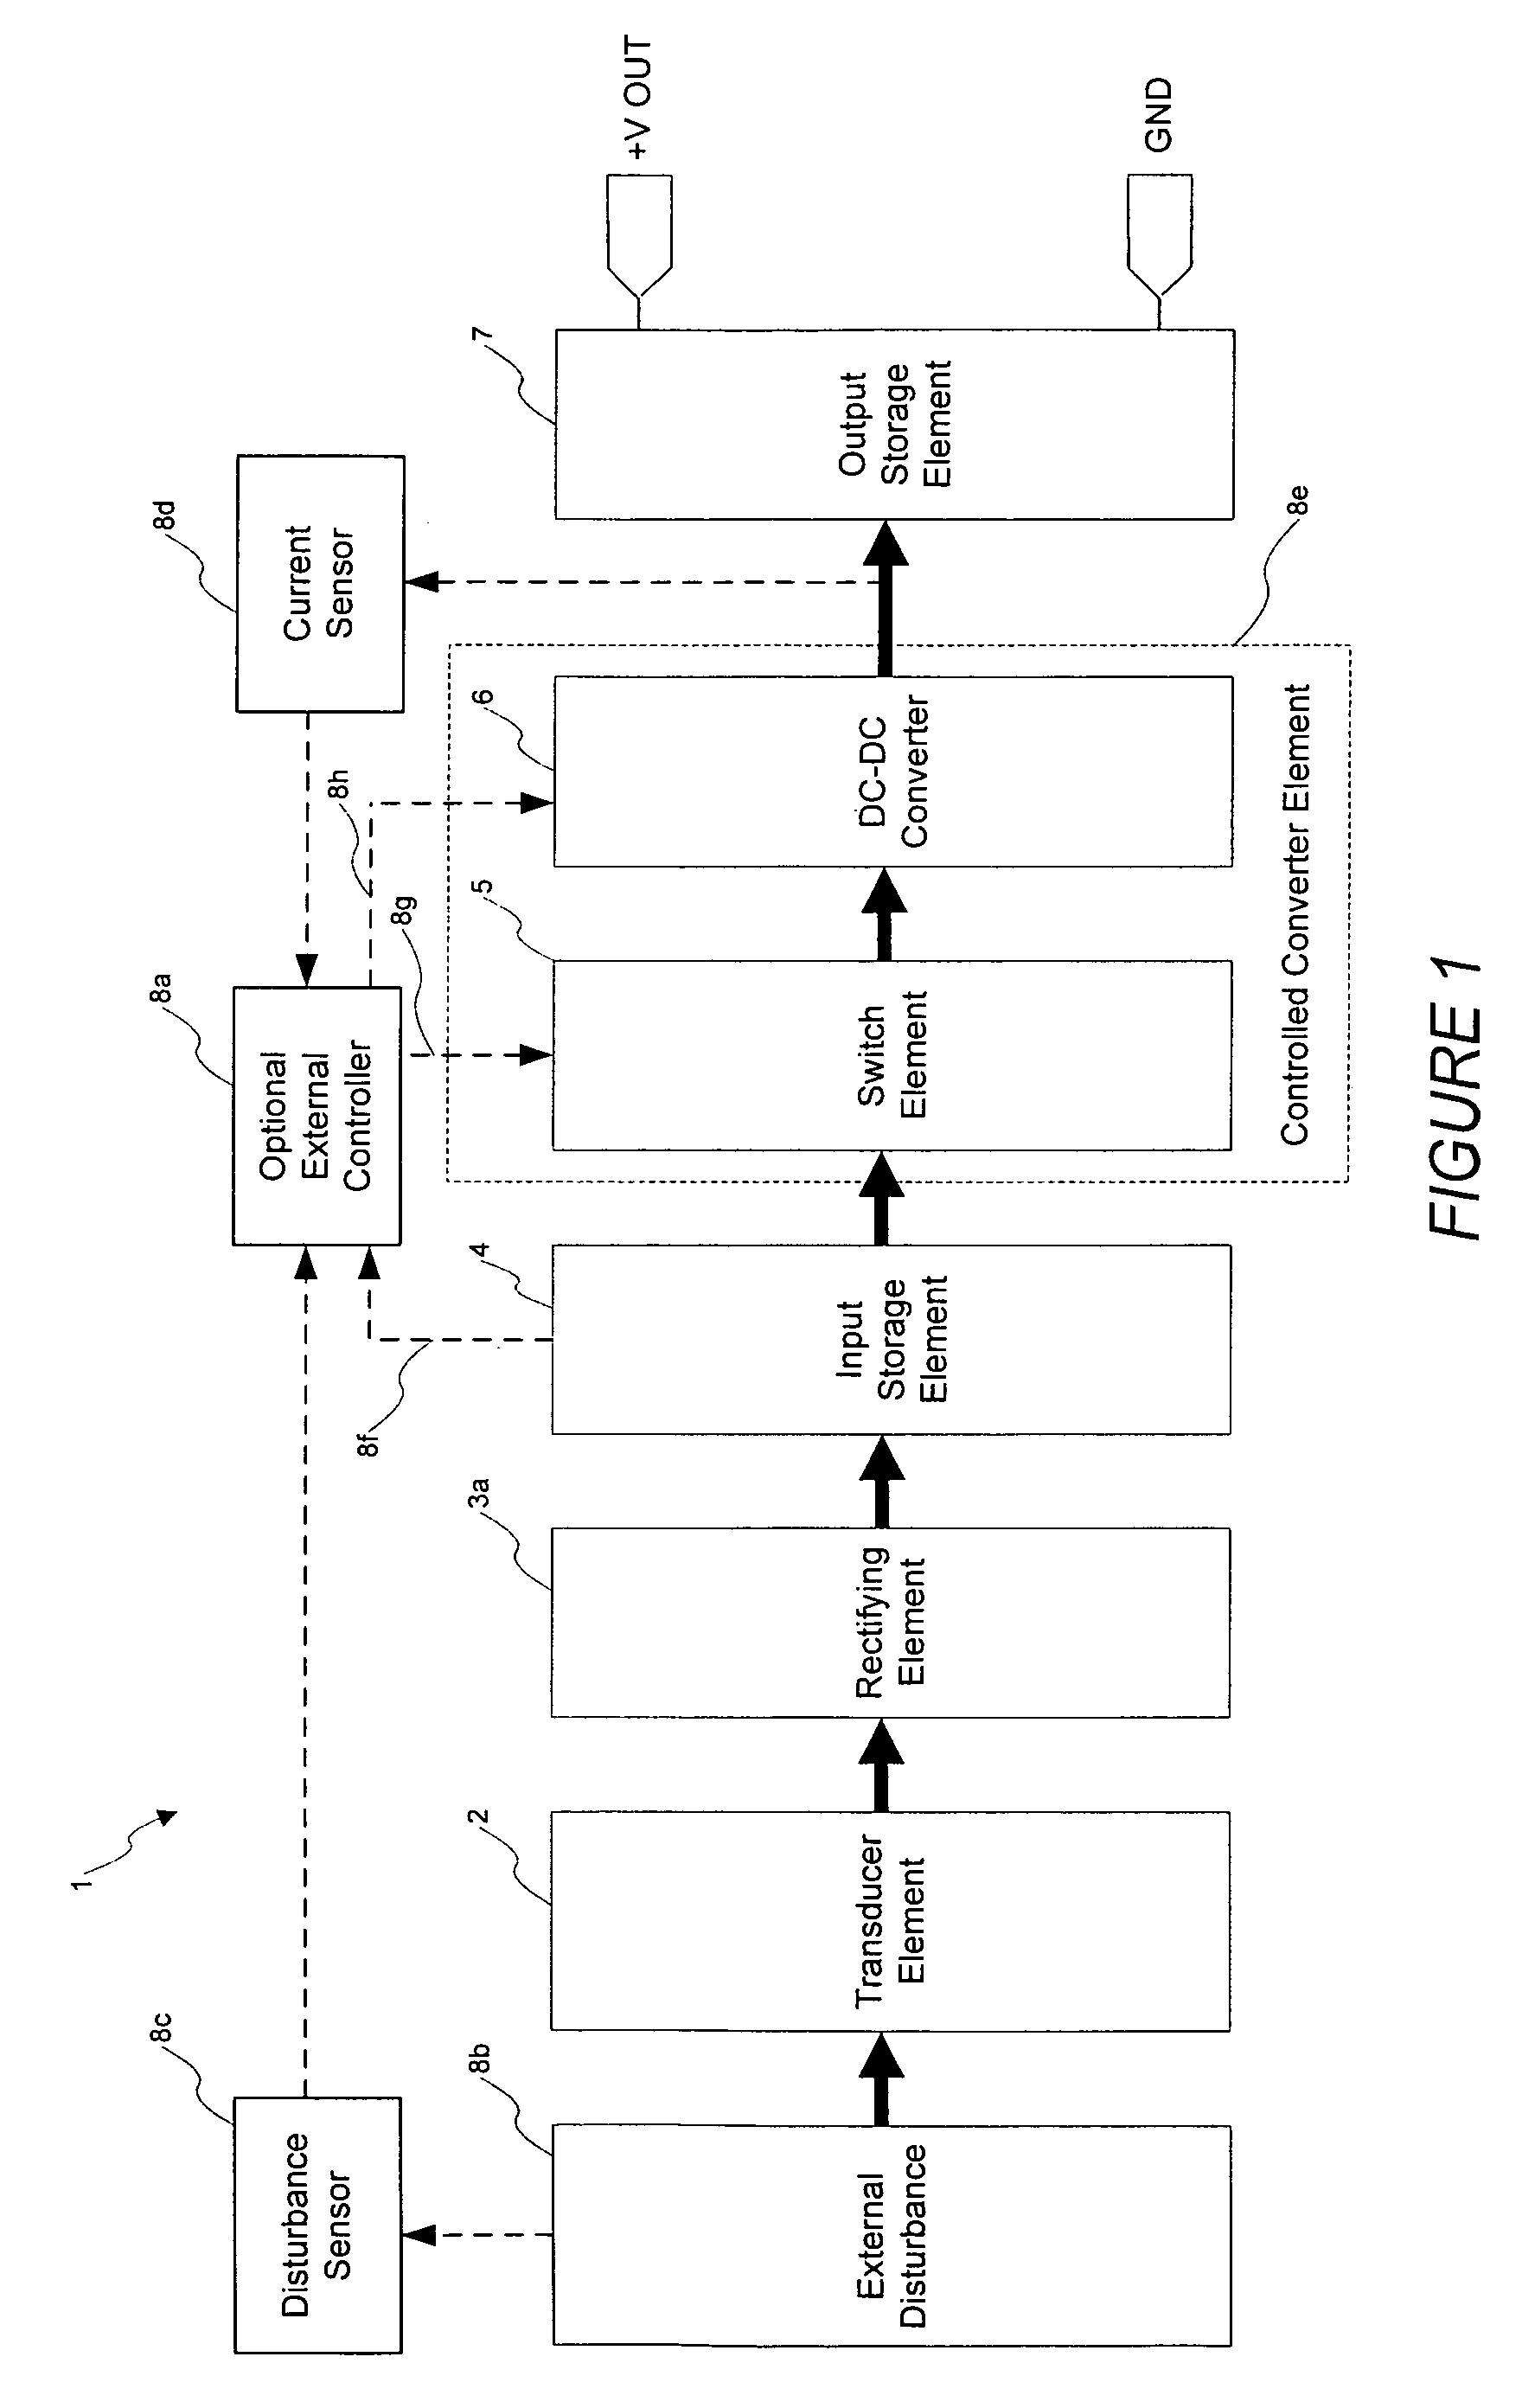 System for optimal energy harvesting and storage from an electromechanical transducer